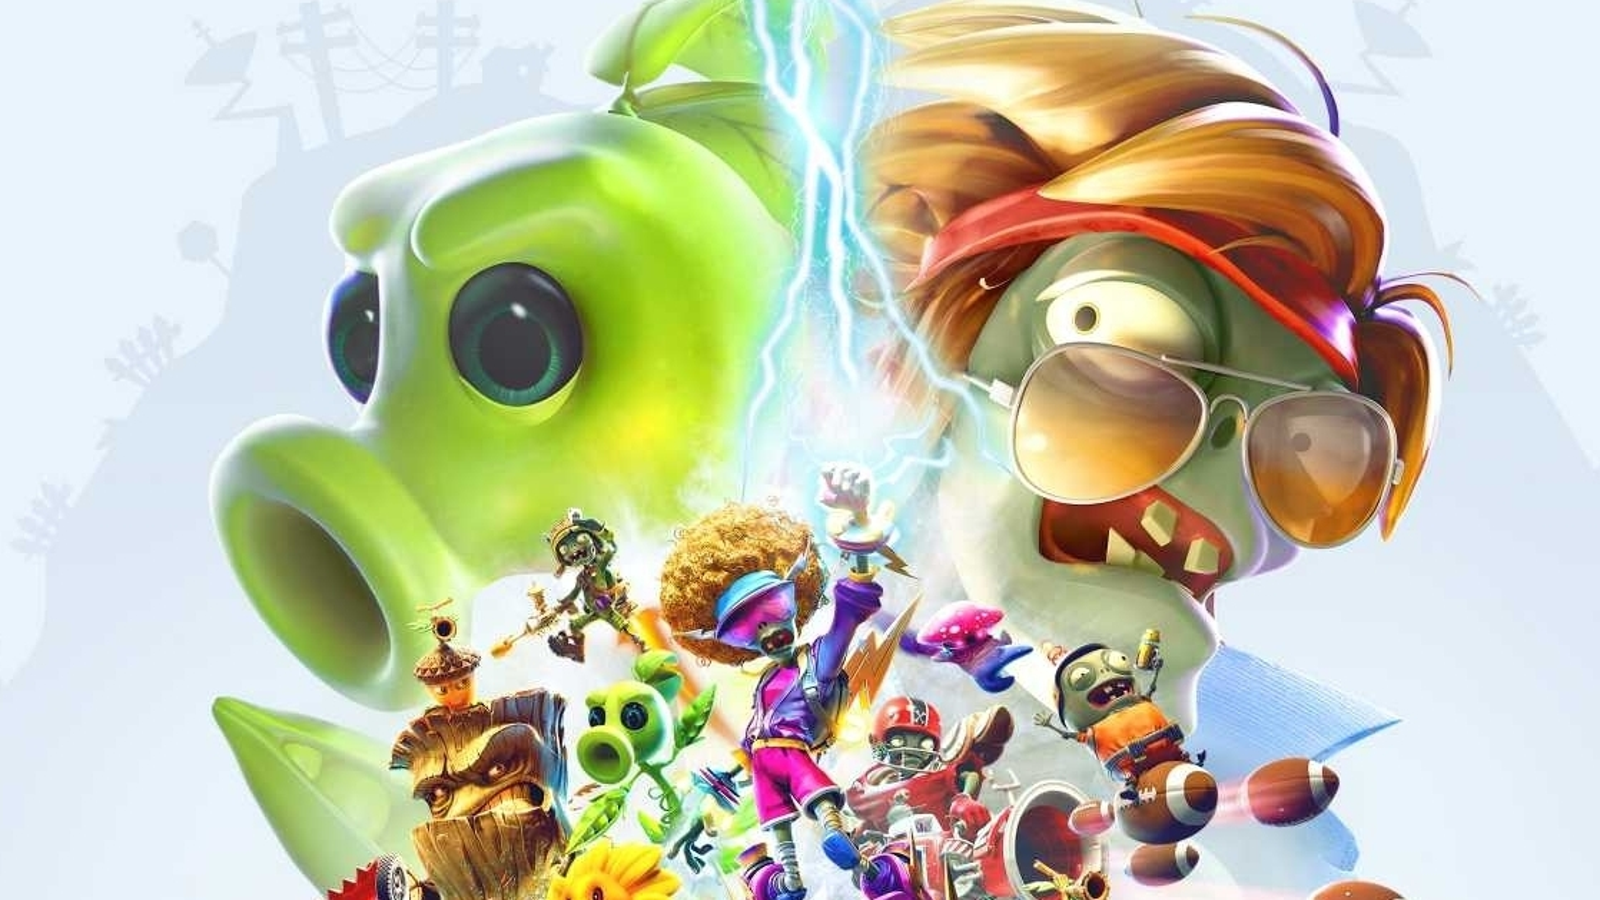 Plants vs. Zombies: Battle for Neighborville Is Available Now in